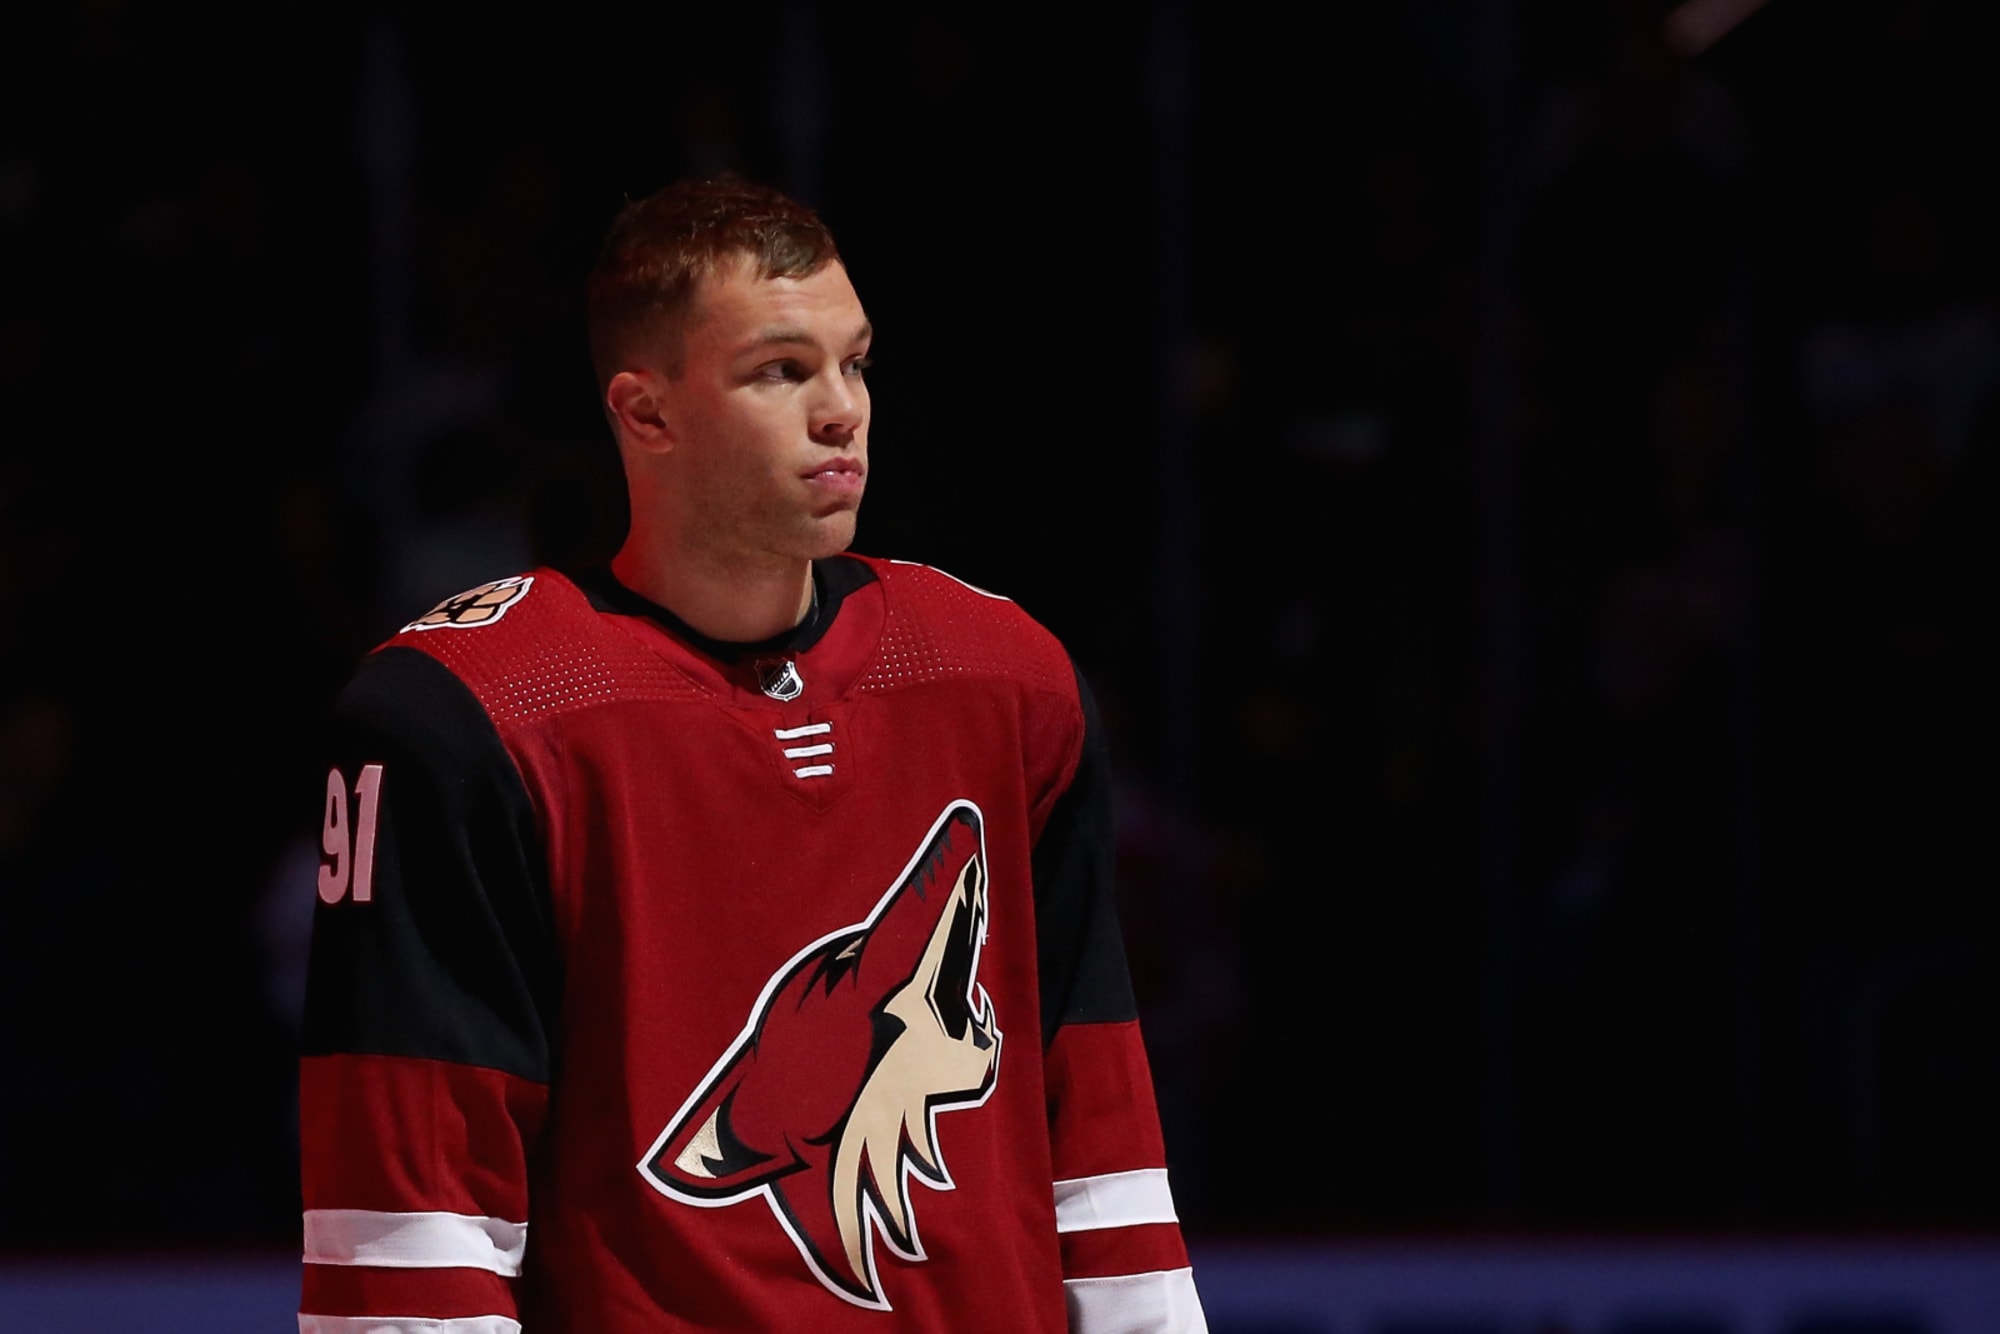 Keeping Coyotes intact was a 'prerequisite' of Taylor Hall trade